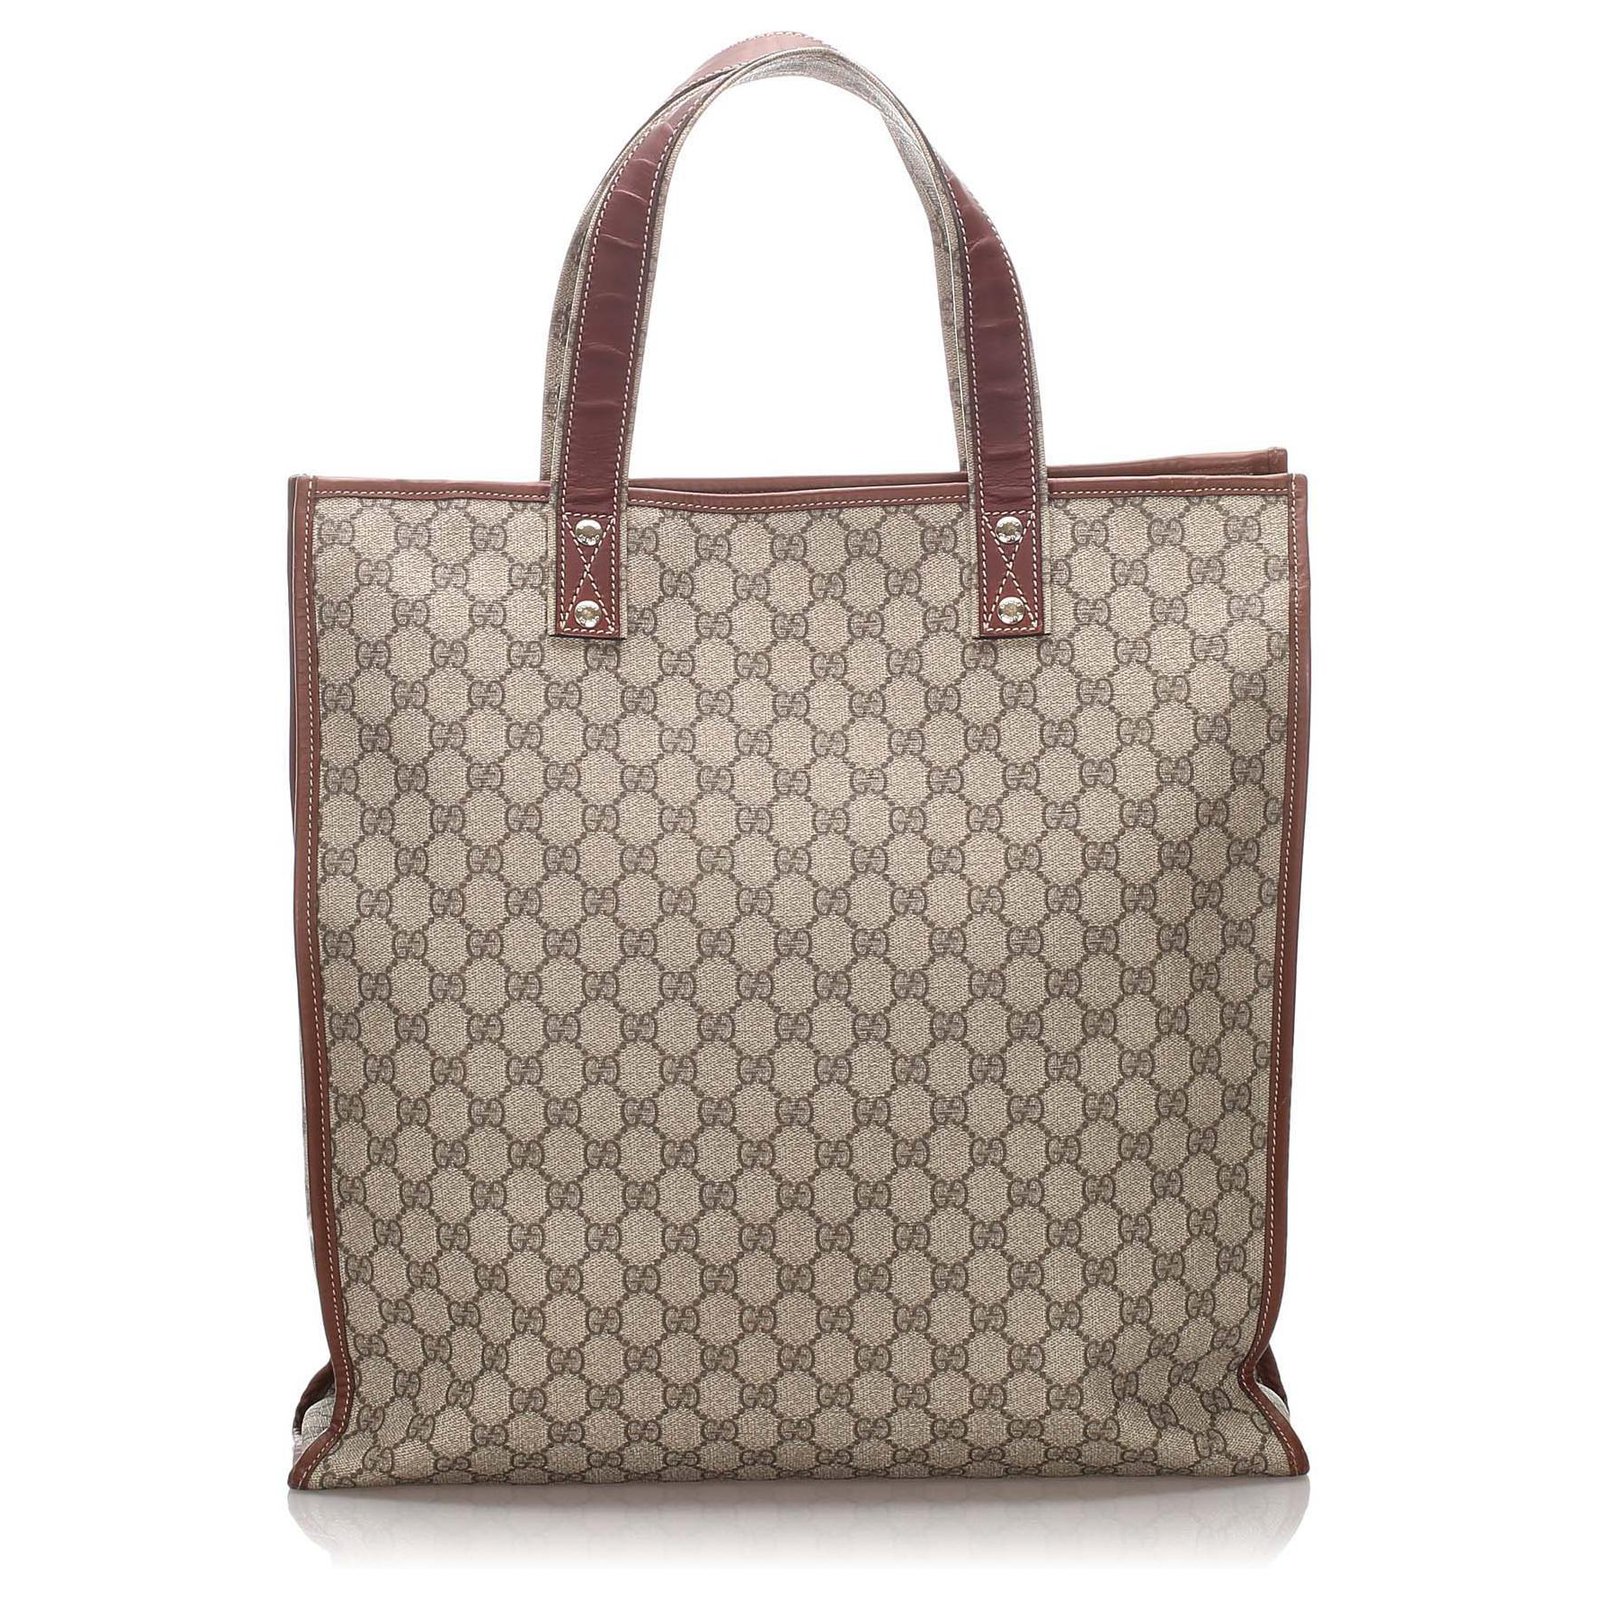 Gucci Brown Large GG Supreme Shopper Tote Beige Leather Cloth Pony ...